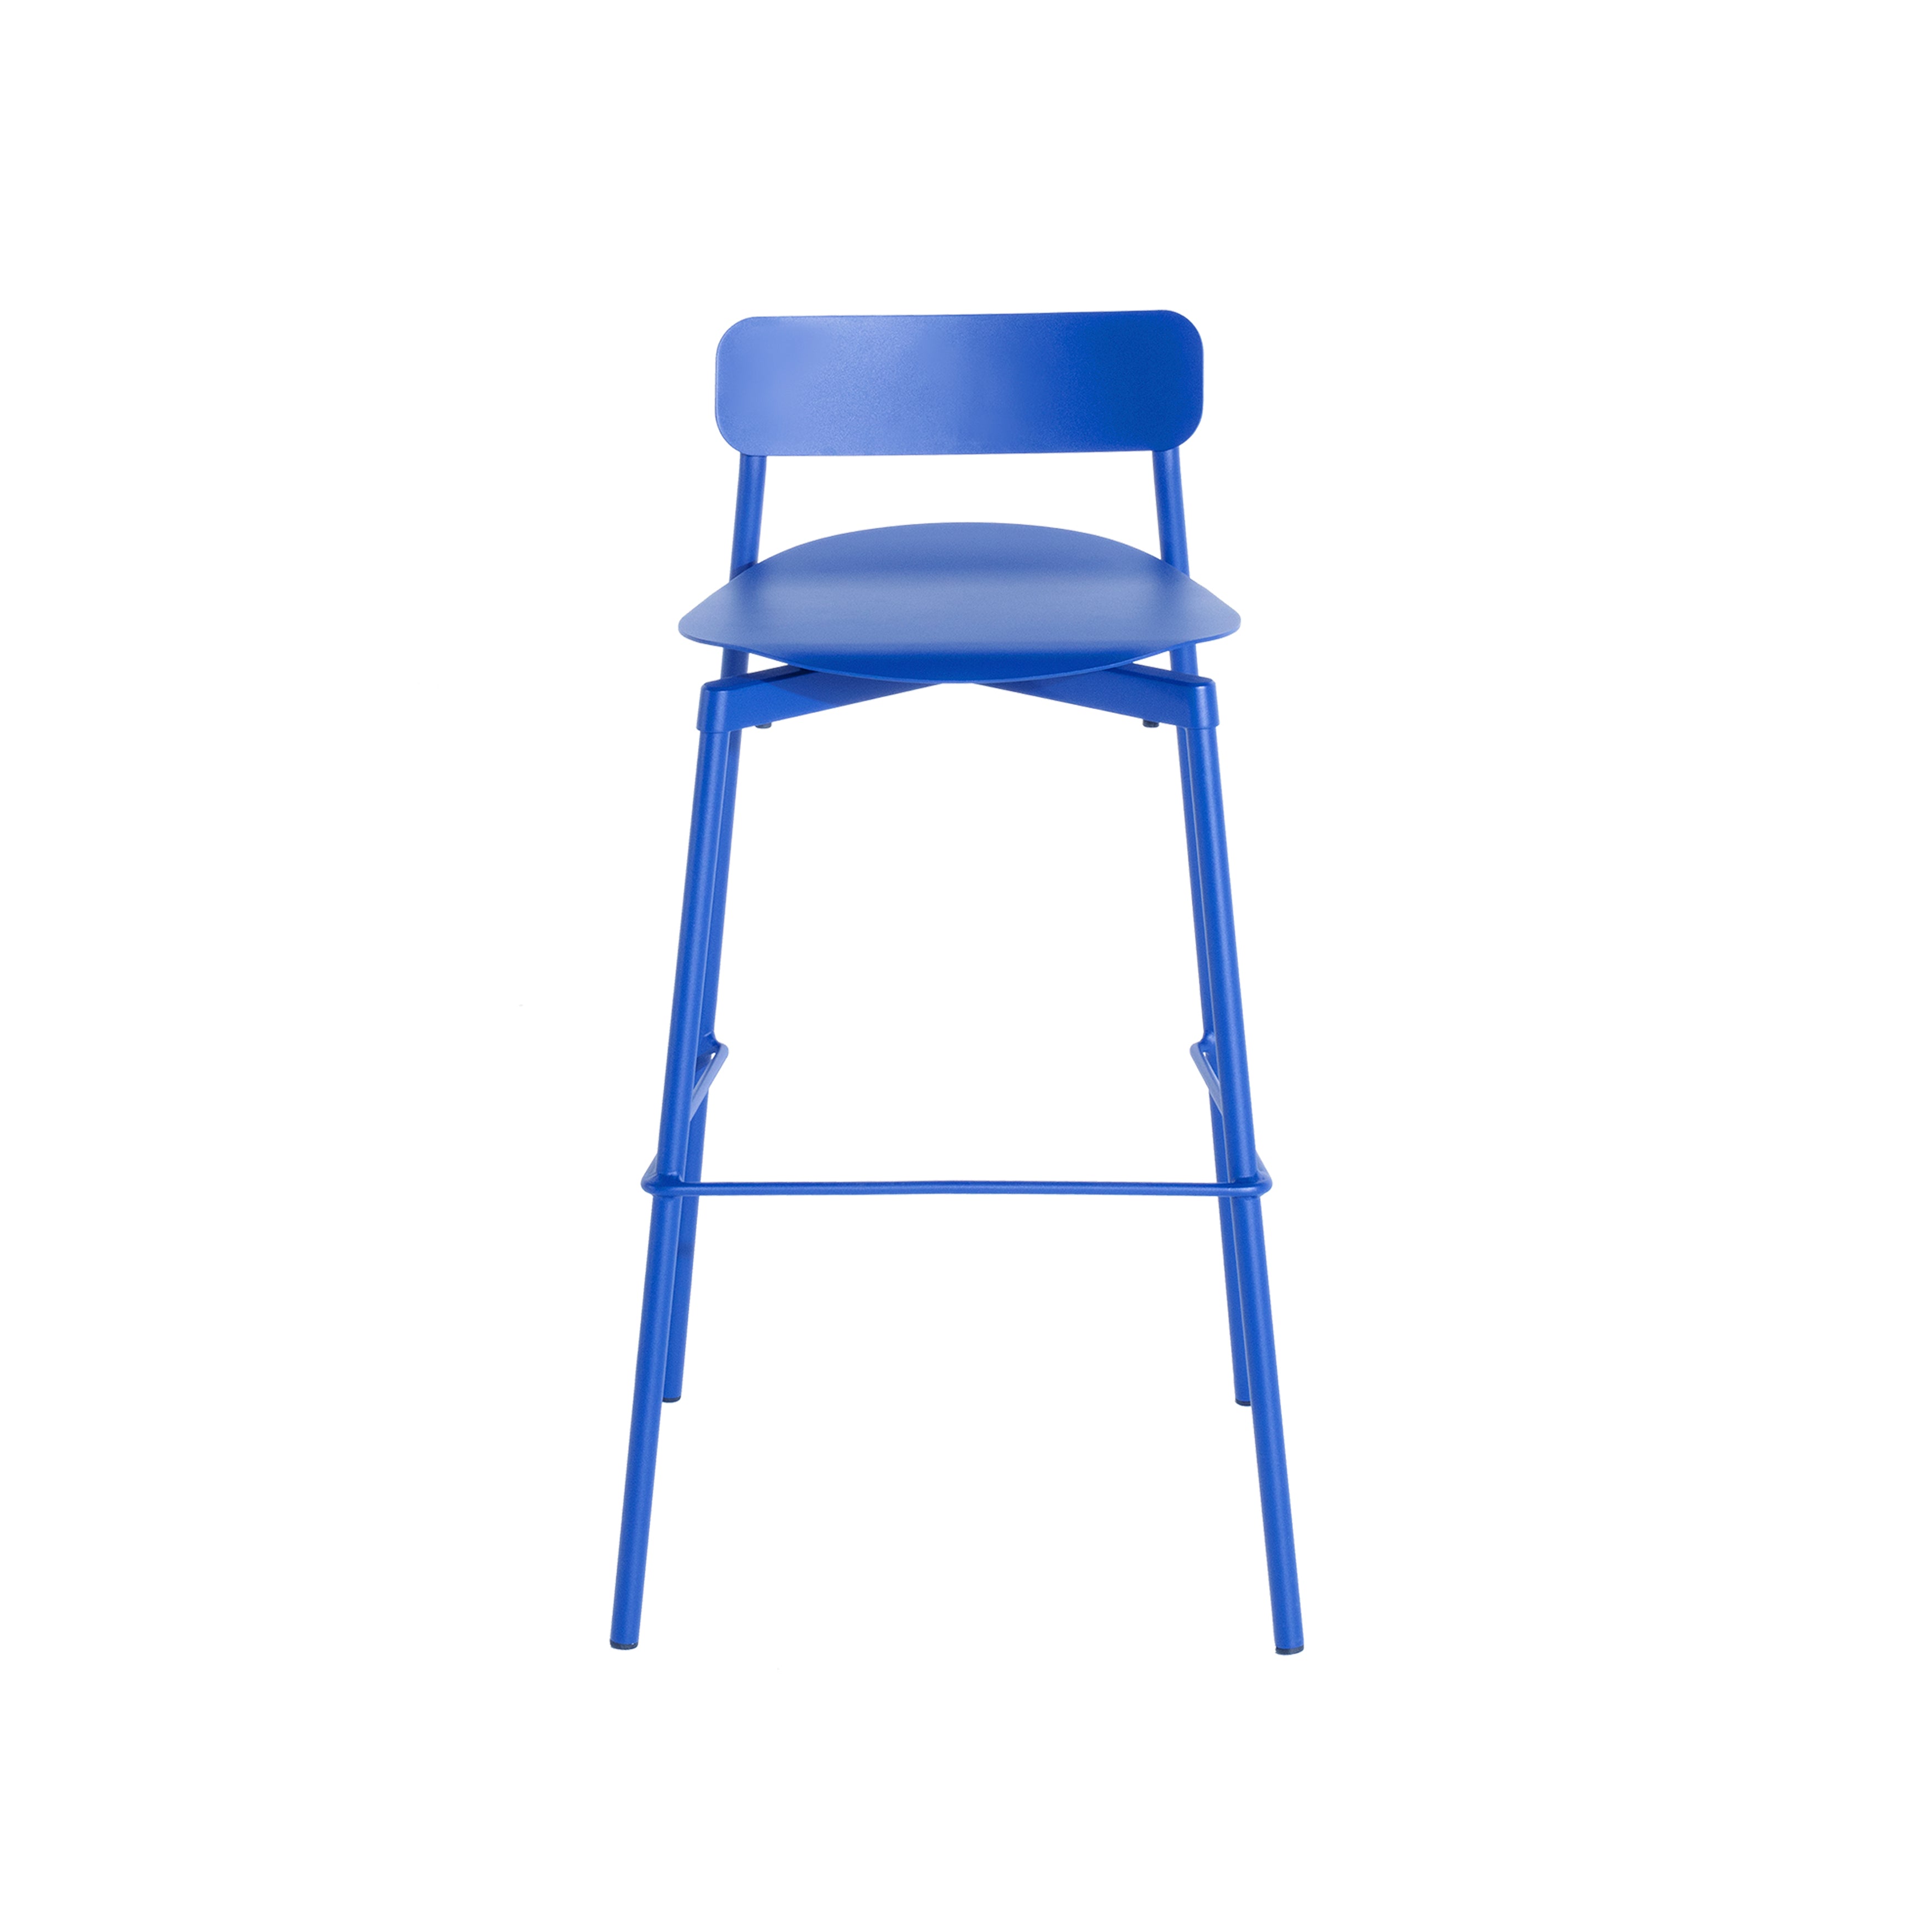  Fromme Stacking Bar + Counter Stool: Counter + Blue